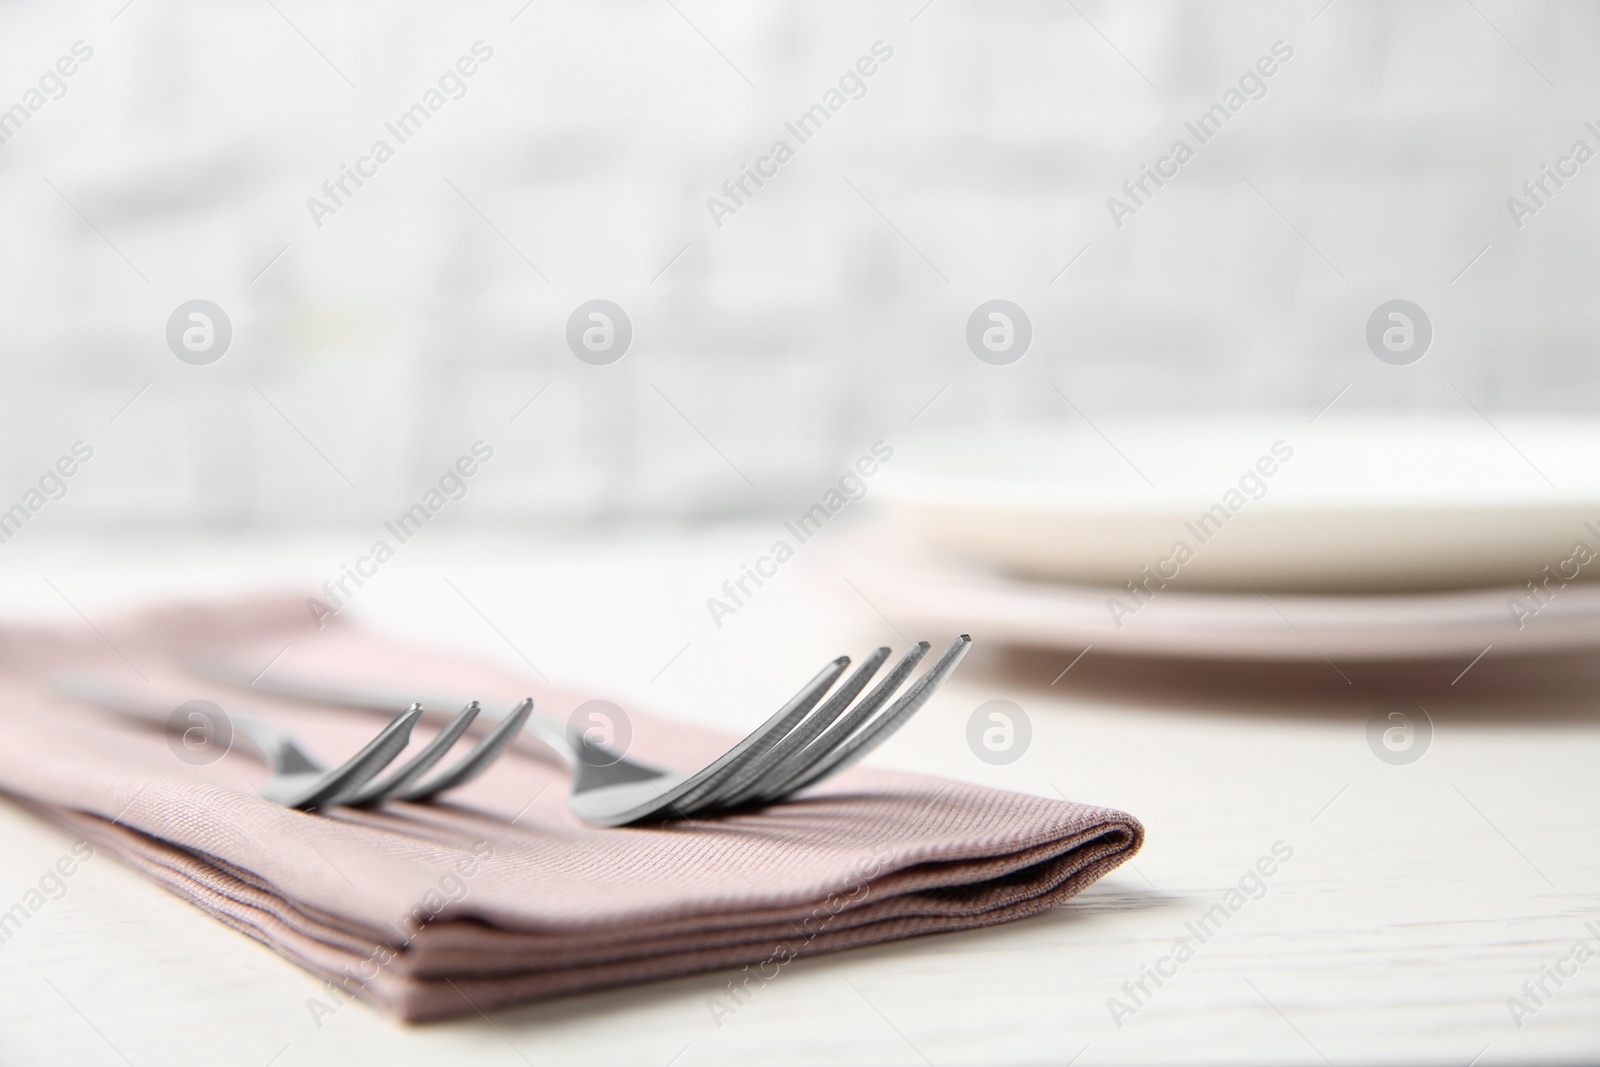 Photo of Cutlery set and dishware on white wooden table